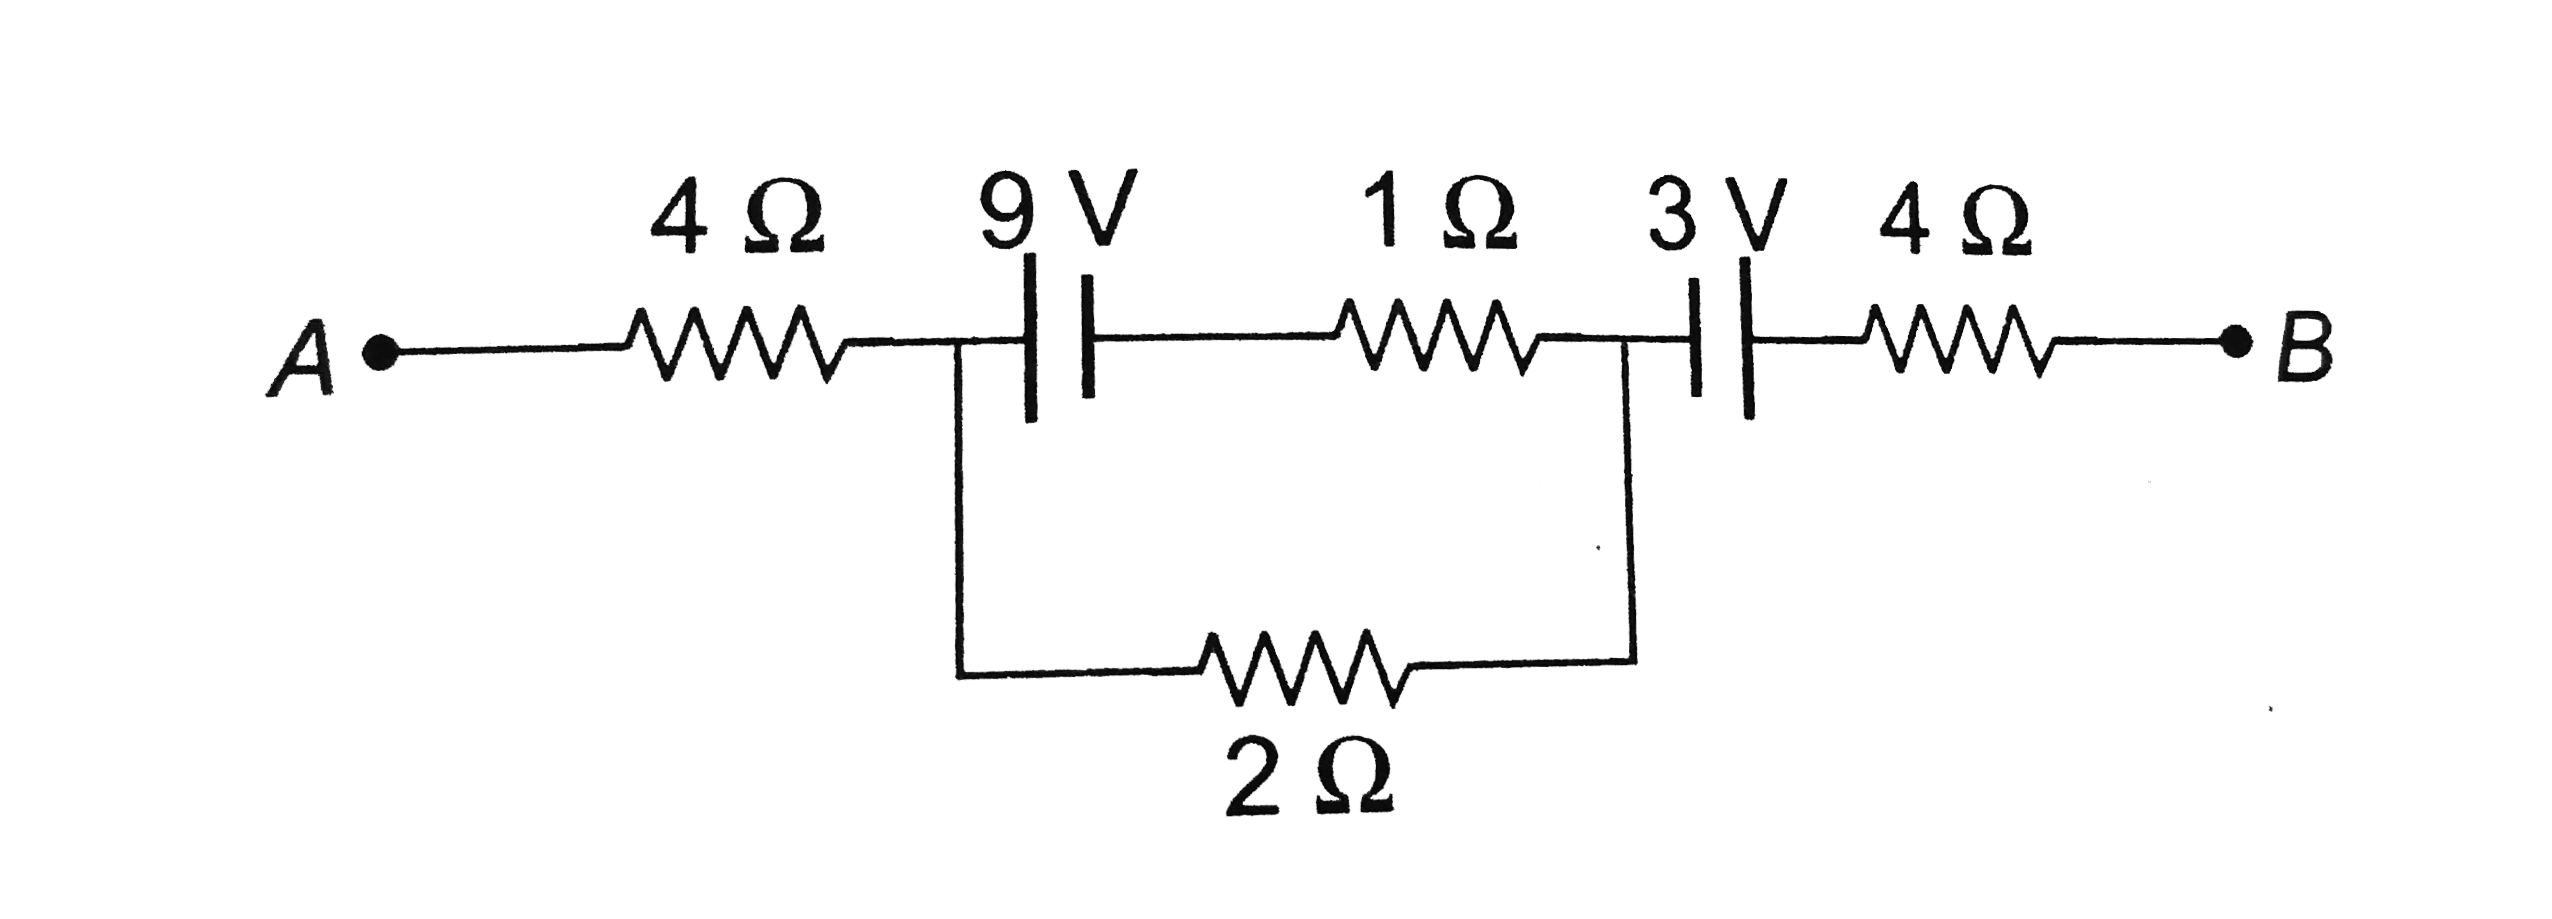 In the circuit shown in figure potential difference between point A and B is 16 V. Find the current passing through 2 Omega resistance.